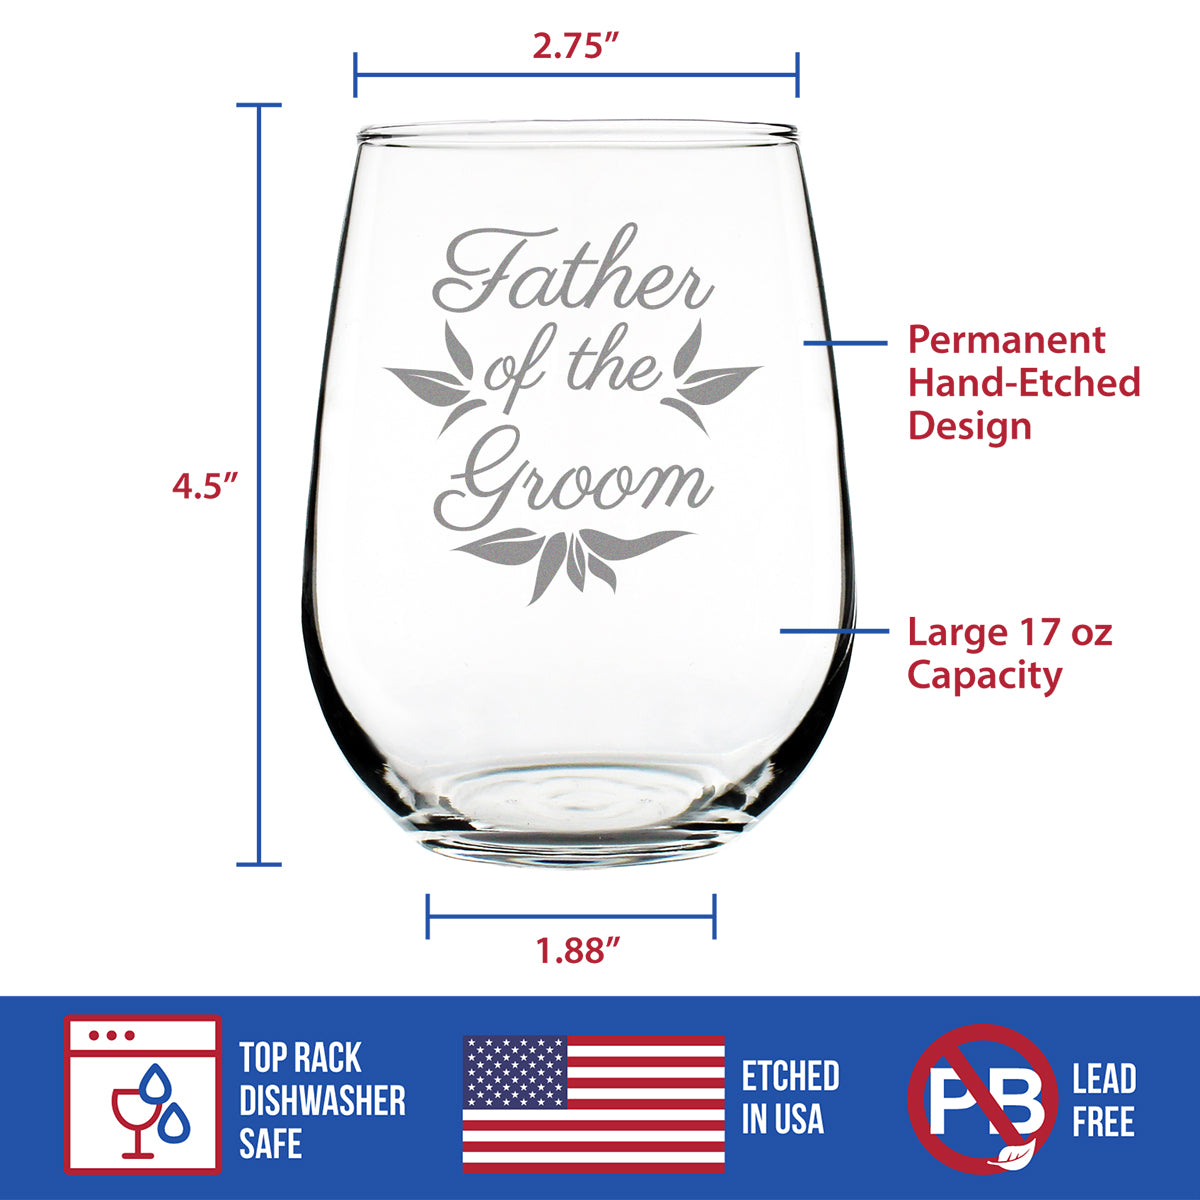 Father of the Groom Stemless Wine Glass - Unique Wedding Gift for Soon to be Father-in-Law - Cute Engraved Wedding Cup Gift